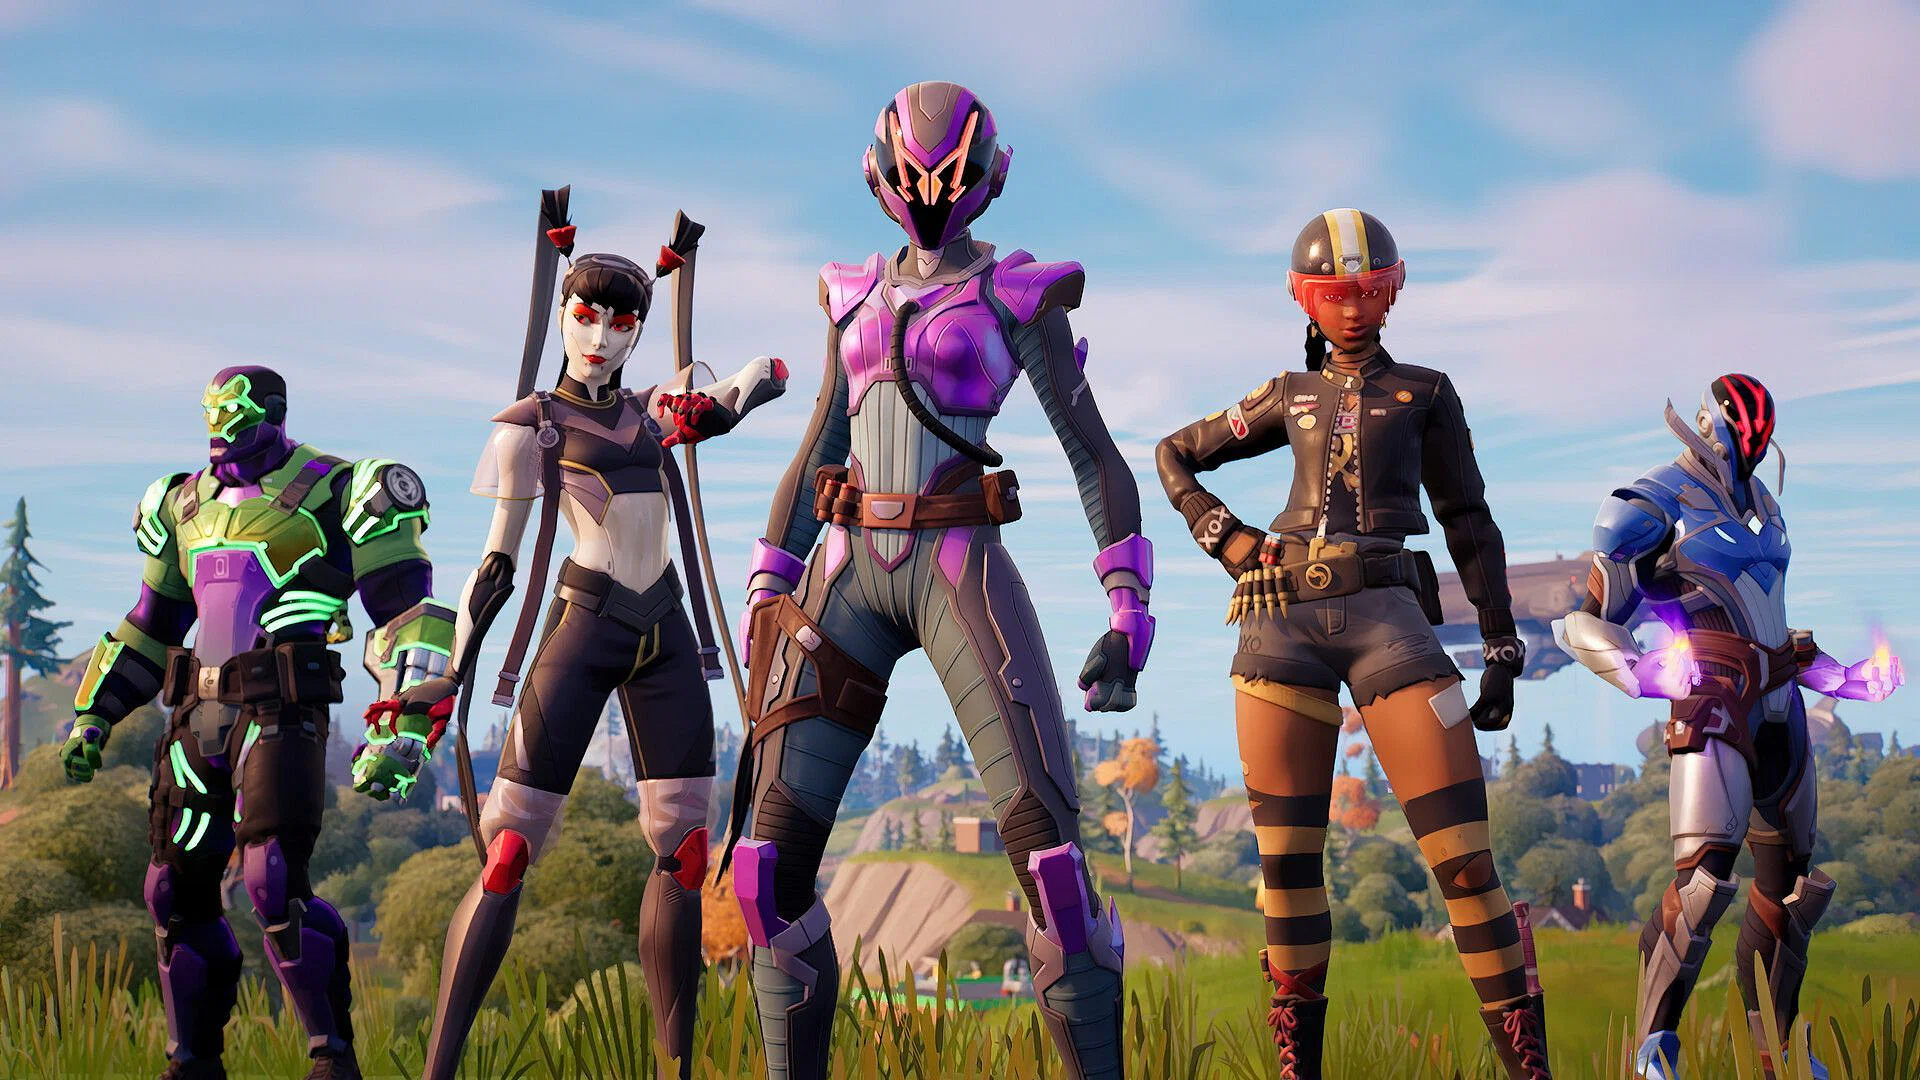 Epic Games CEO teases Fortnite coming back to iOS